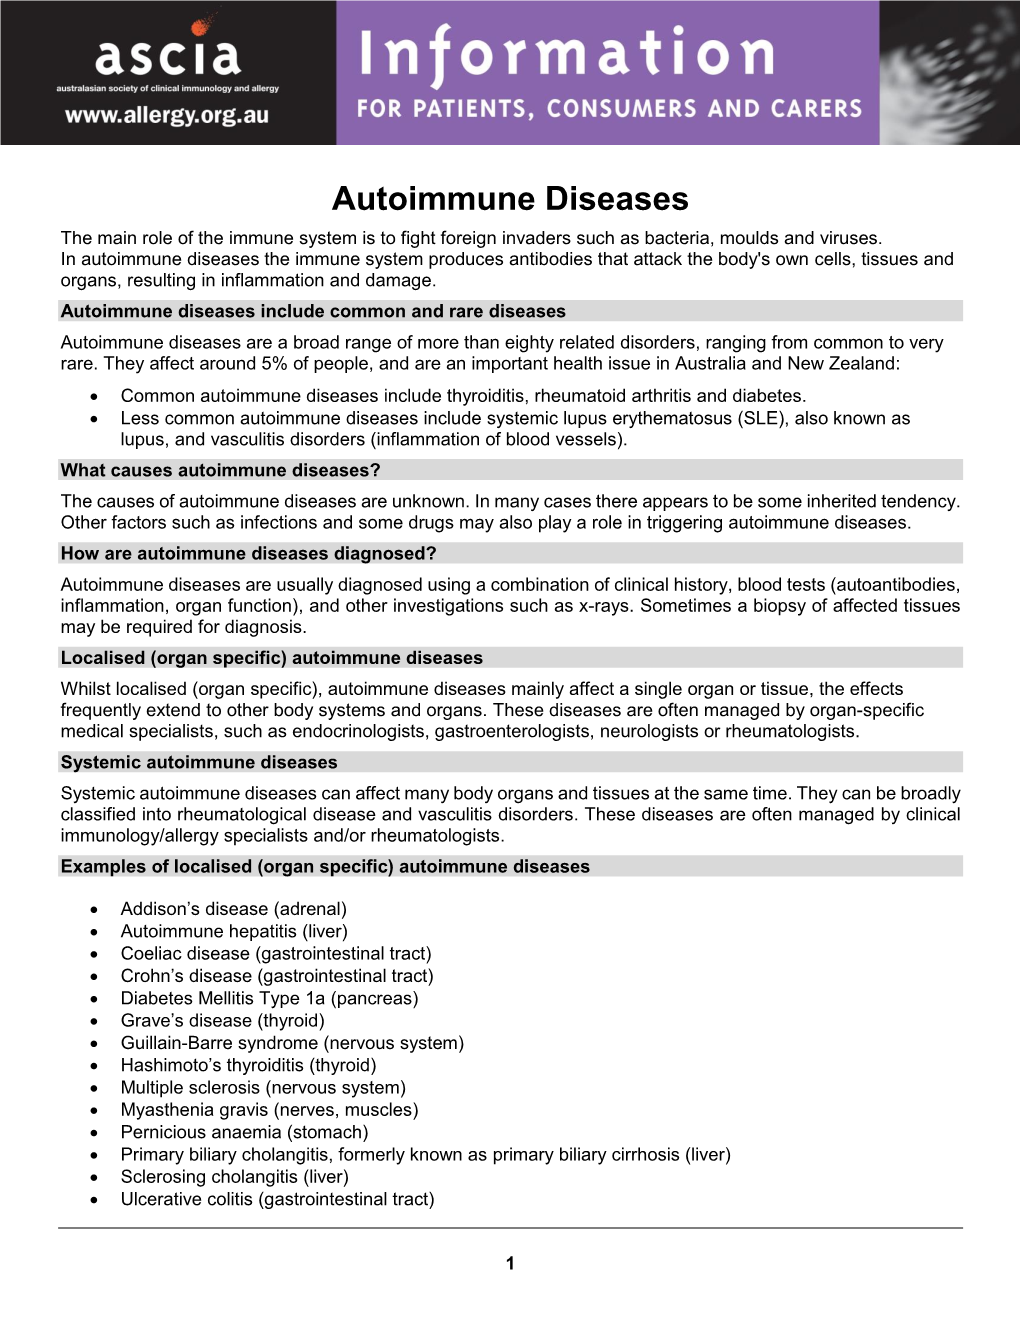 Autoimmune Diseases the Main Role of the Immune System Is to Fight Foreign Invaders Such As Bacteria, Moulds and Viruses